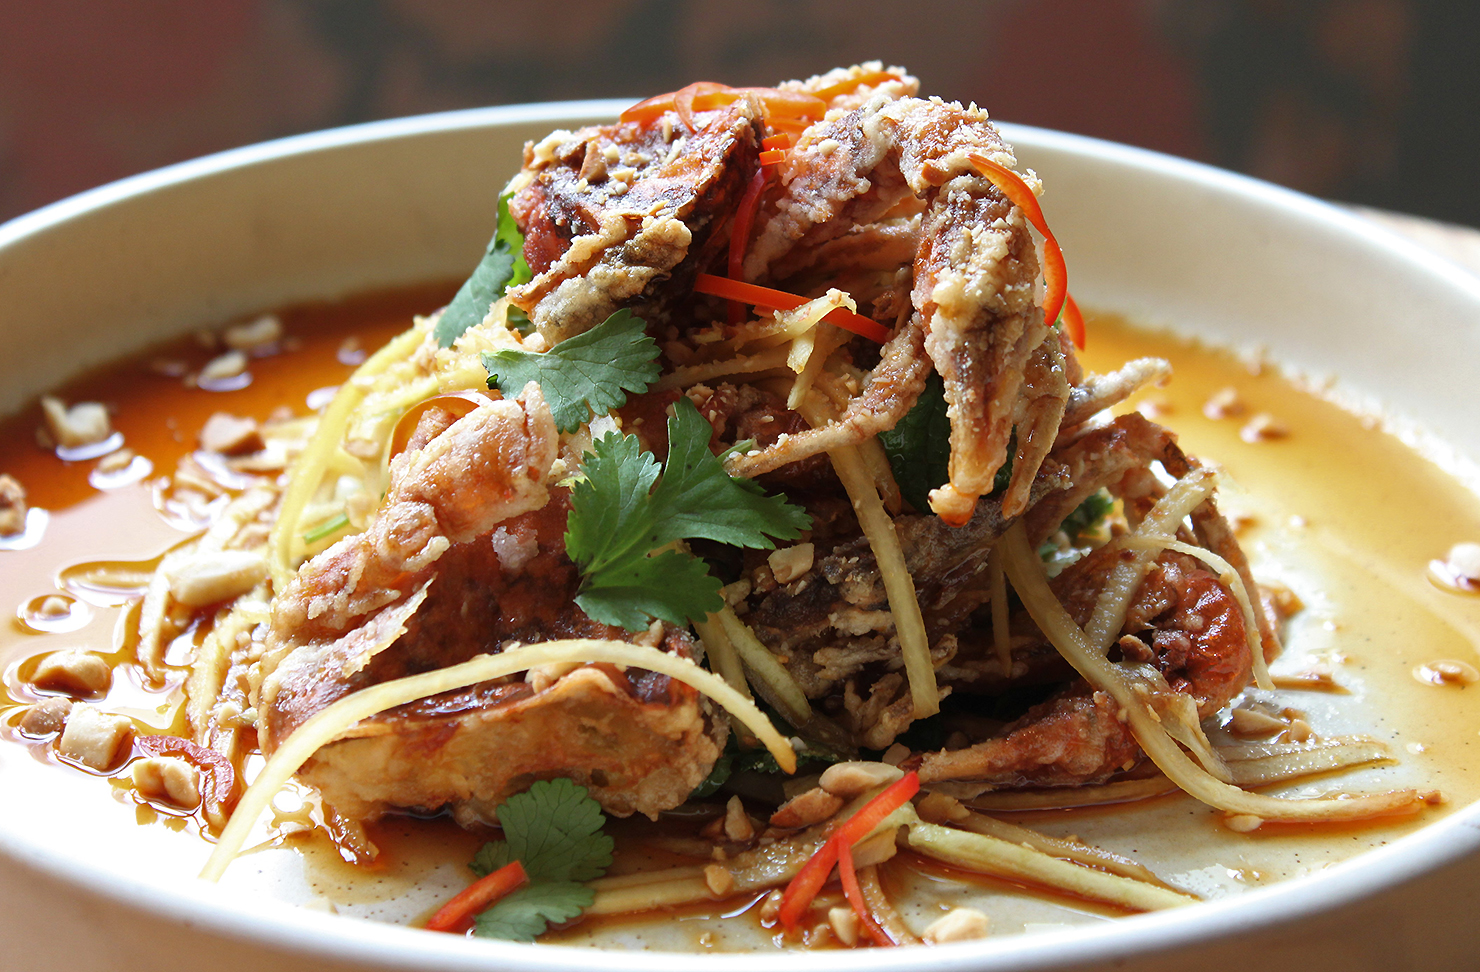 Soft Shell Crab with shredded Kohlrabi sits on a plate looking delicious.